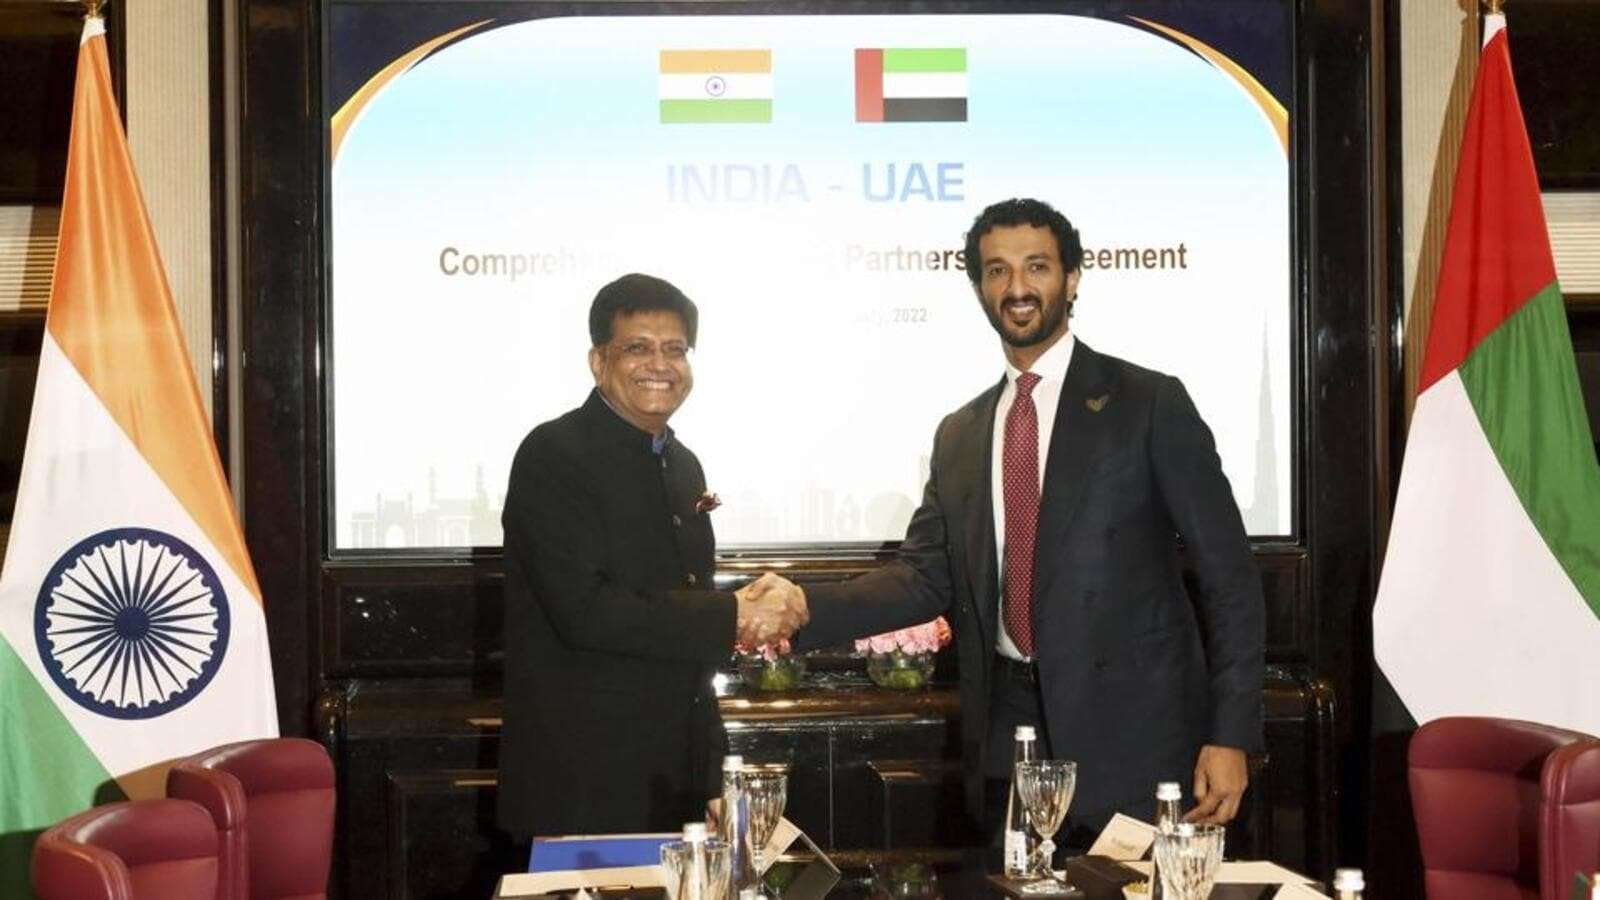 image for India, UAE sign free trade deal expected to double trade to $100 billion in 5yrs